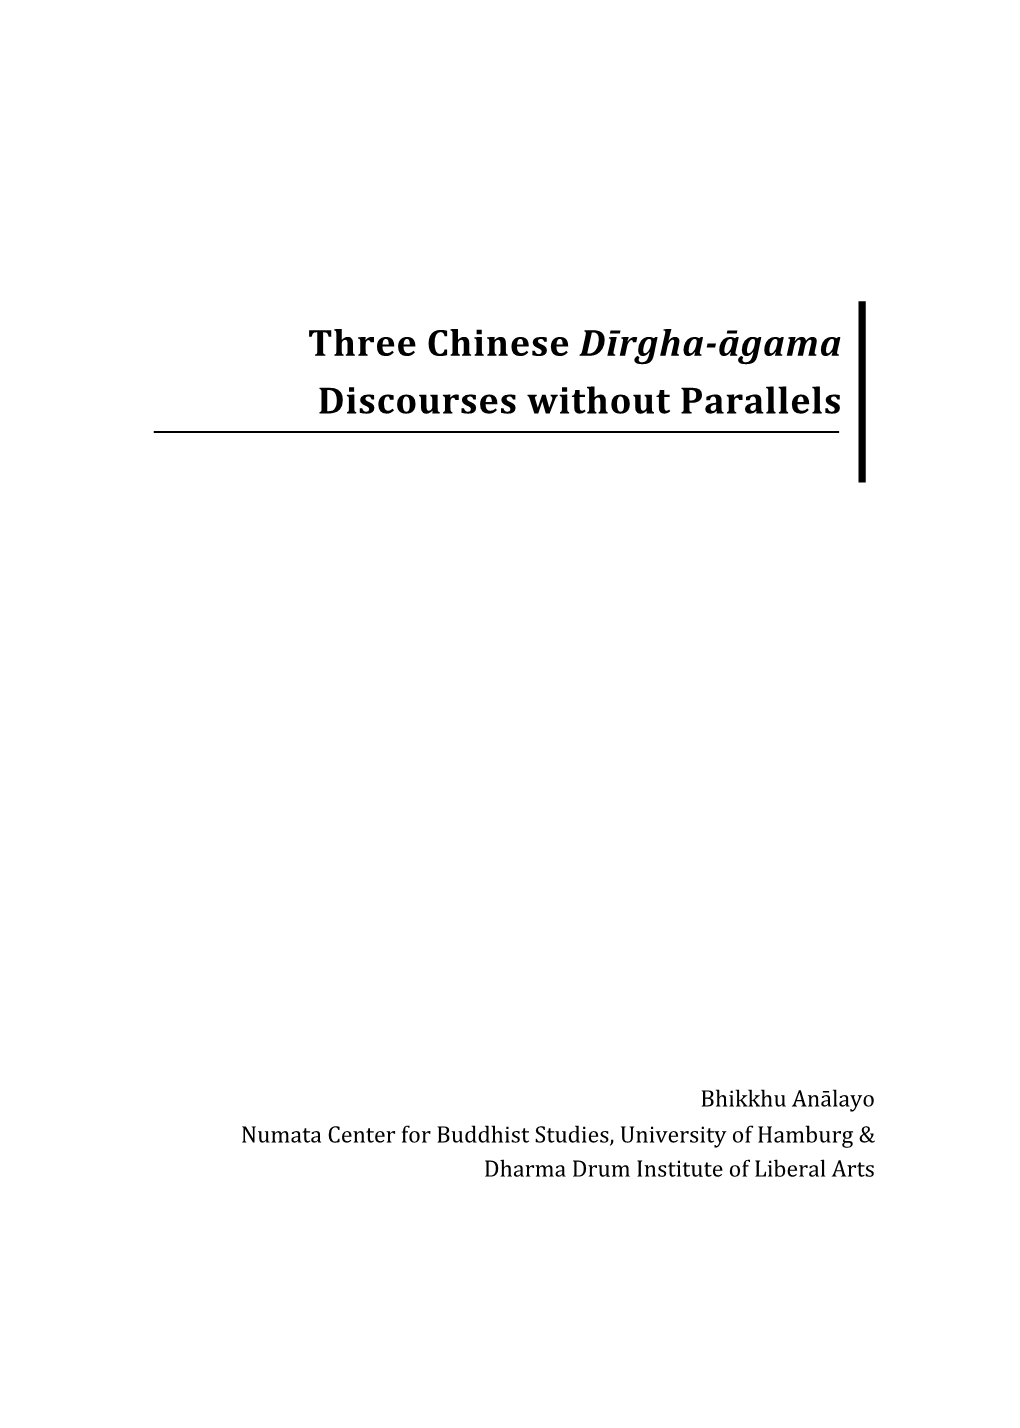 Three Chinese Dīrgha-Āgama Discourses Without Parallels